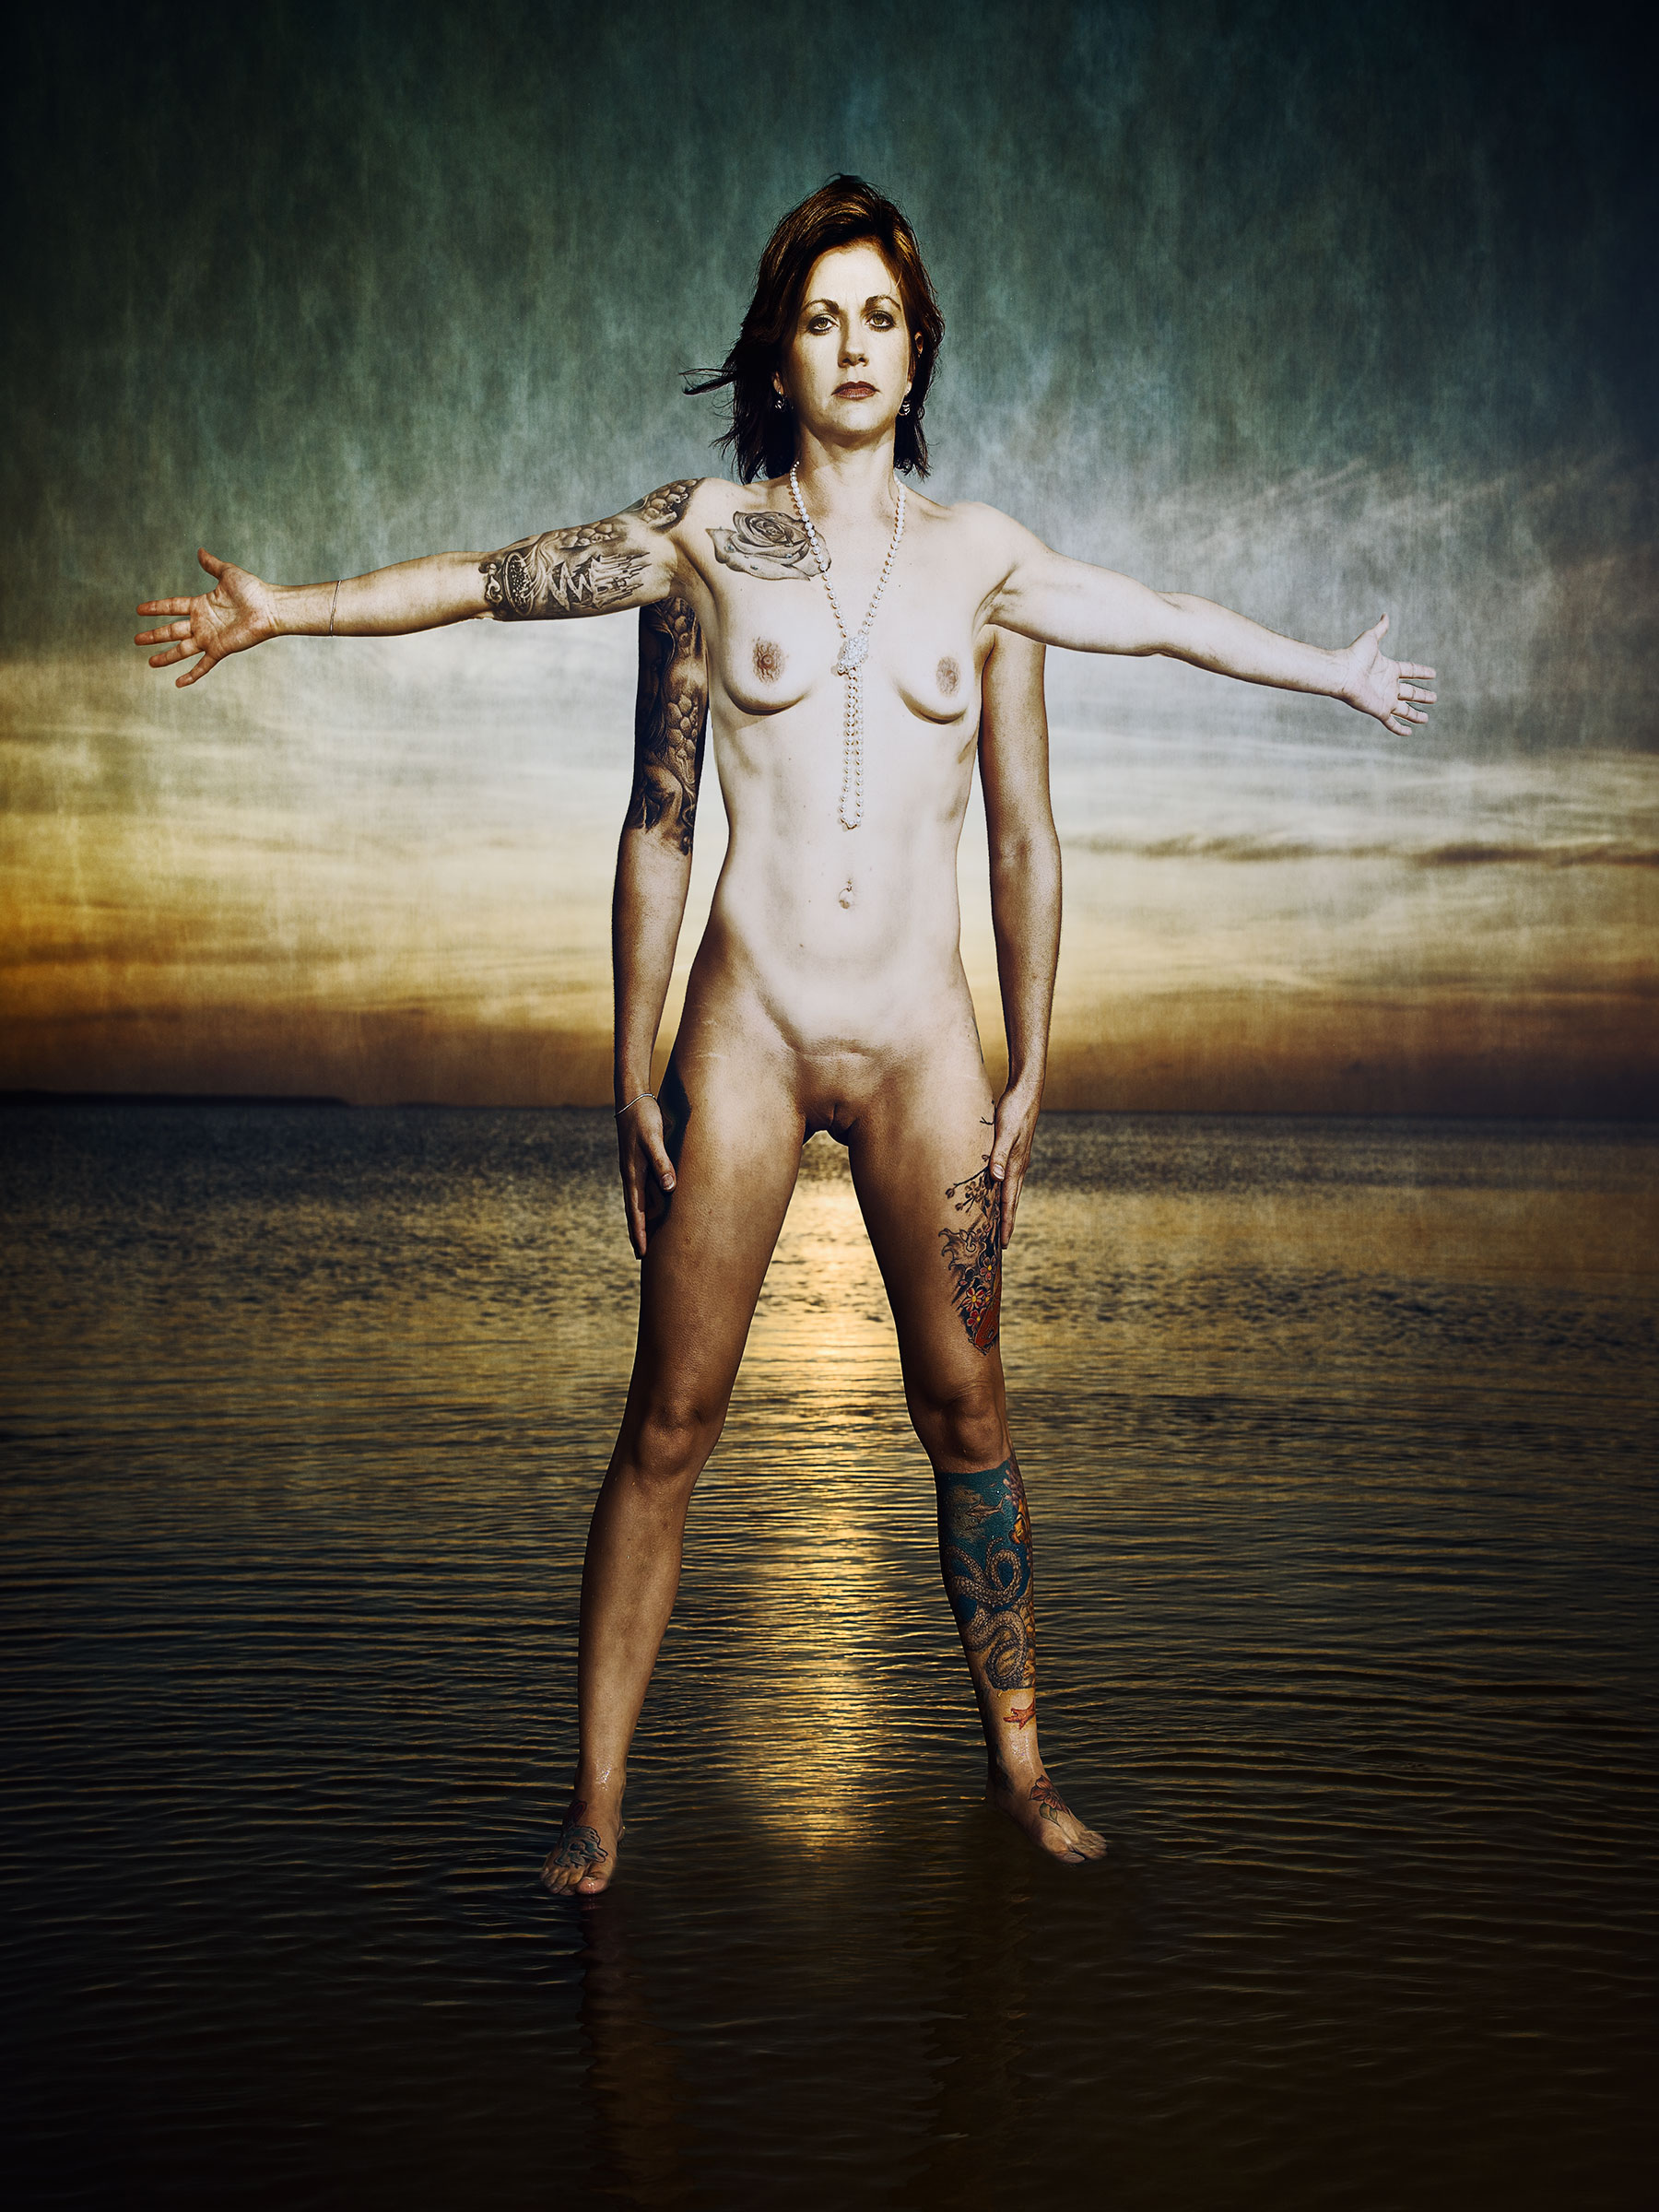 Vitruvian Woman Outer Banks North Carolina Inlet Walking on Water Man Michelangelo Old Master Best creative Professional fine art editorial Conceptual advertising Photographer Wick Beavers Photography New York City LA Boston NY NYC Beijing Danziger